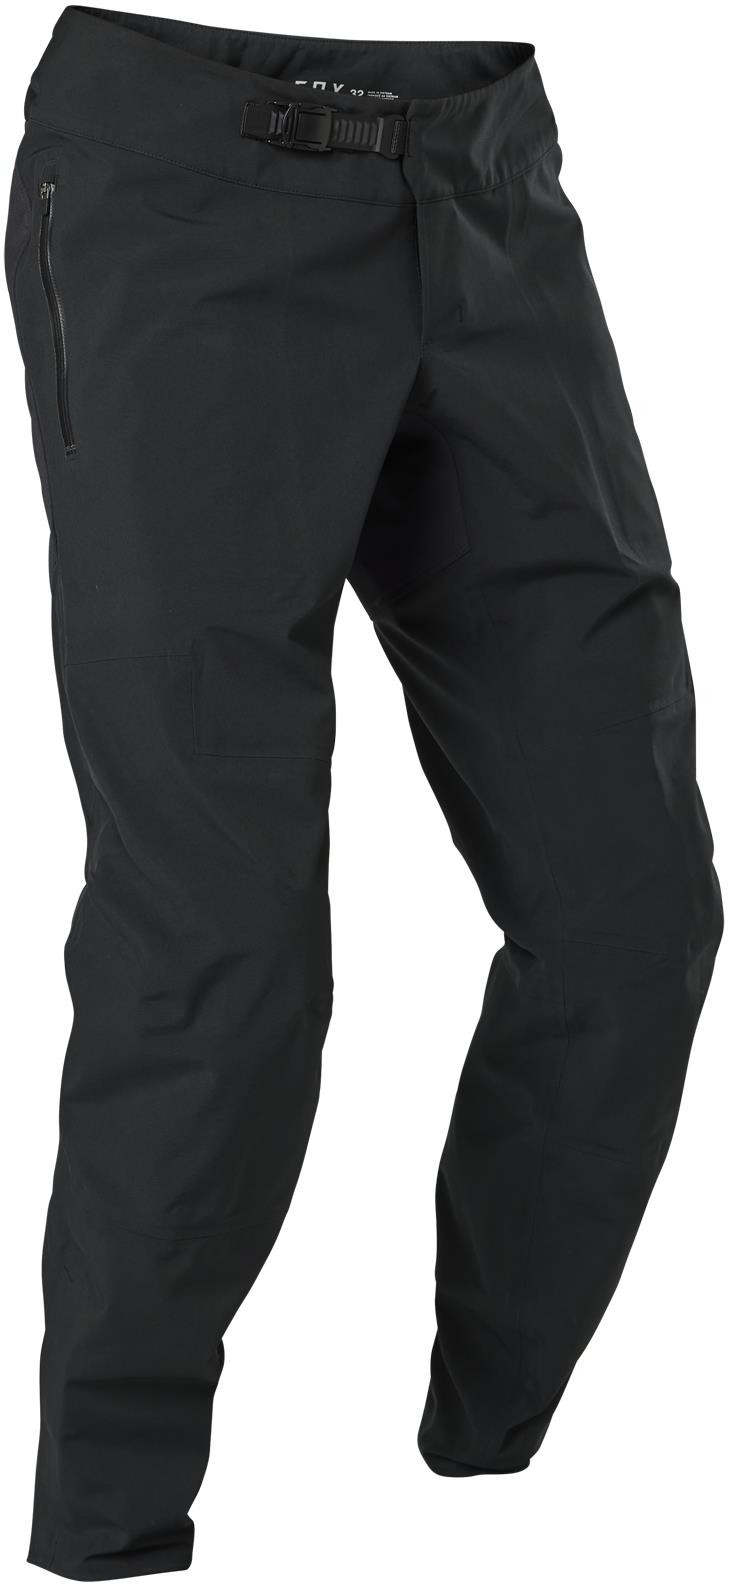 Defend 3L Waterproof MTB Cycling Trousers image 0